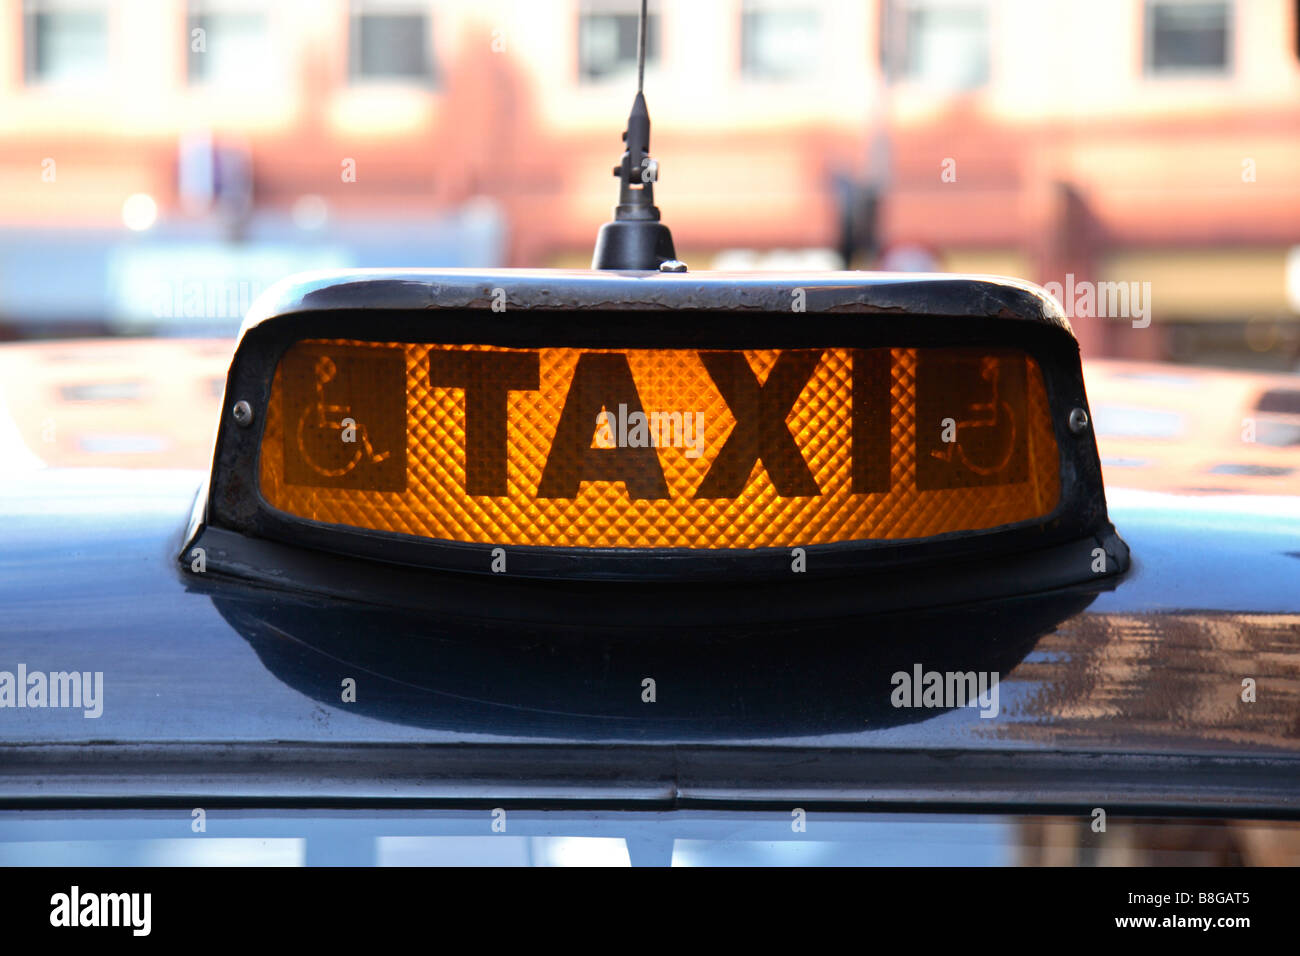 The 'taxi for hire' light on a taxi designed for the disabled, parked outside Harrods, Knightsbridge, London.  Feb 09 Stock Photo